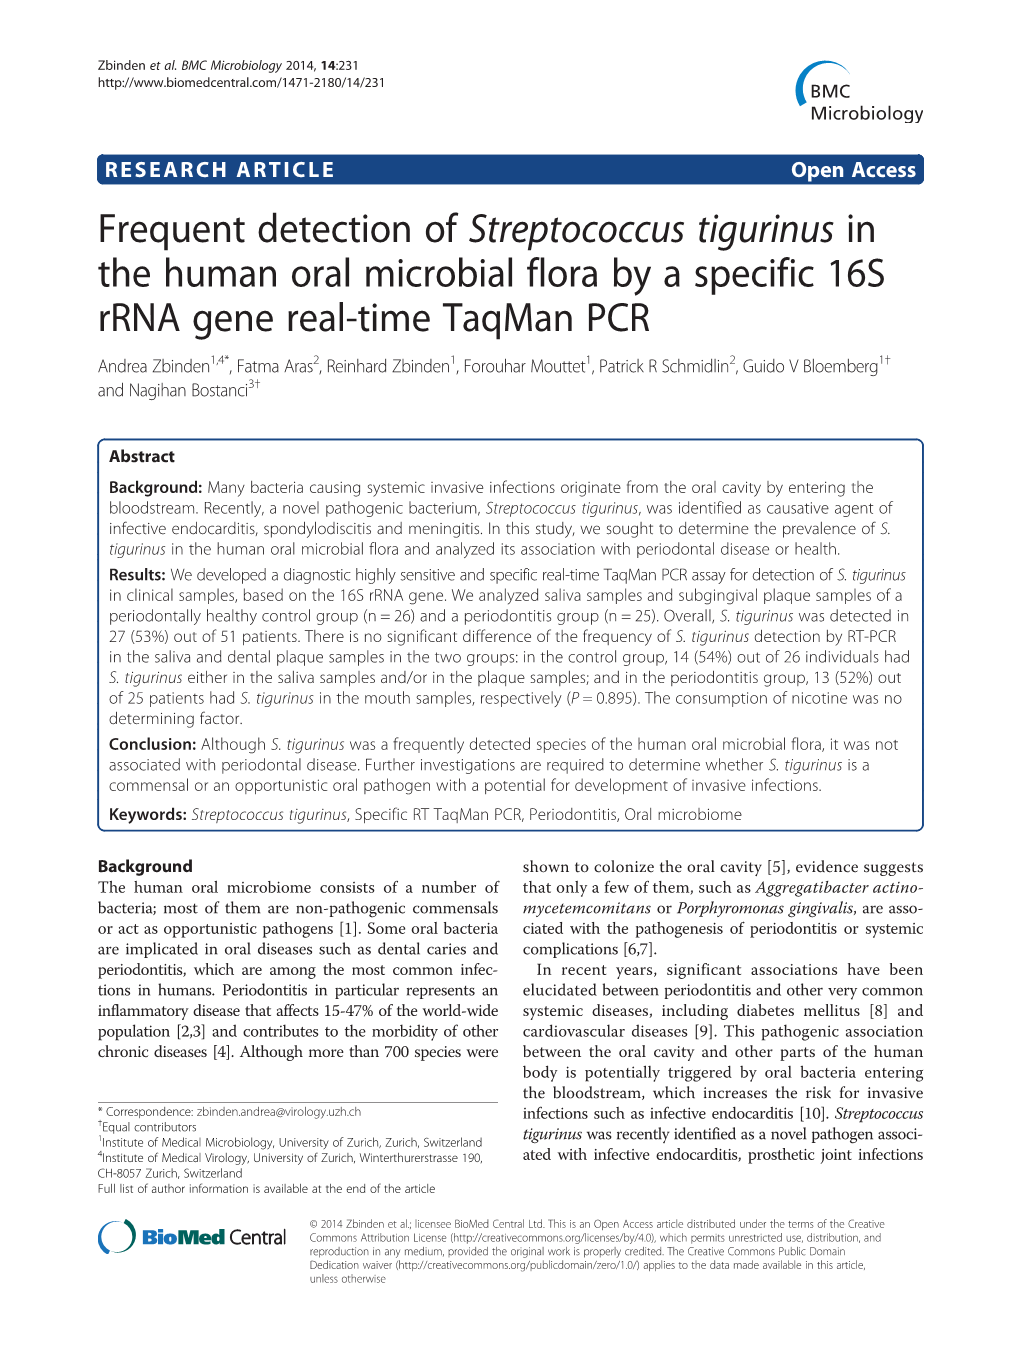 Frequent Detection of Streptococcus Tigurinus in the Human Oral